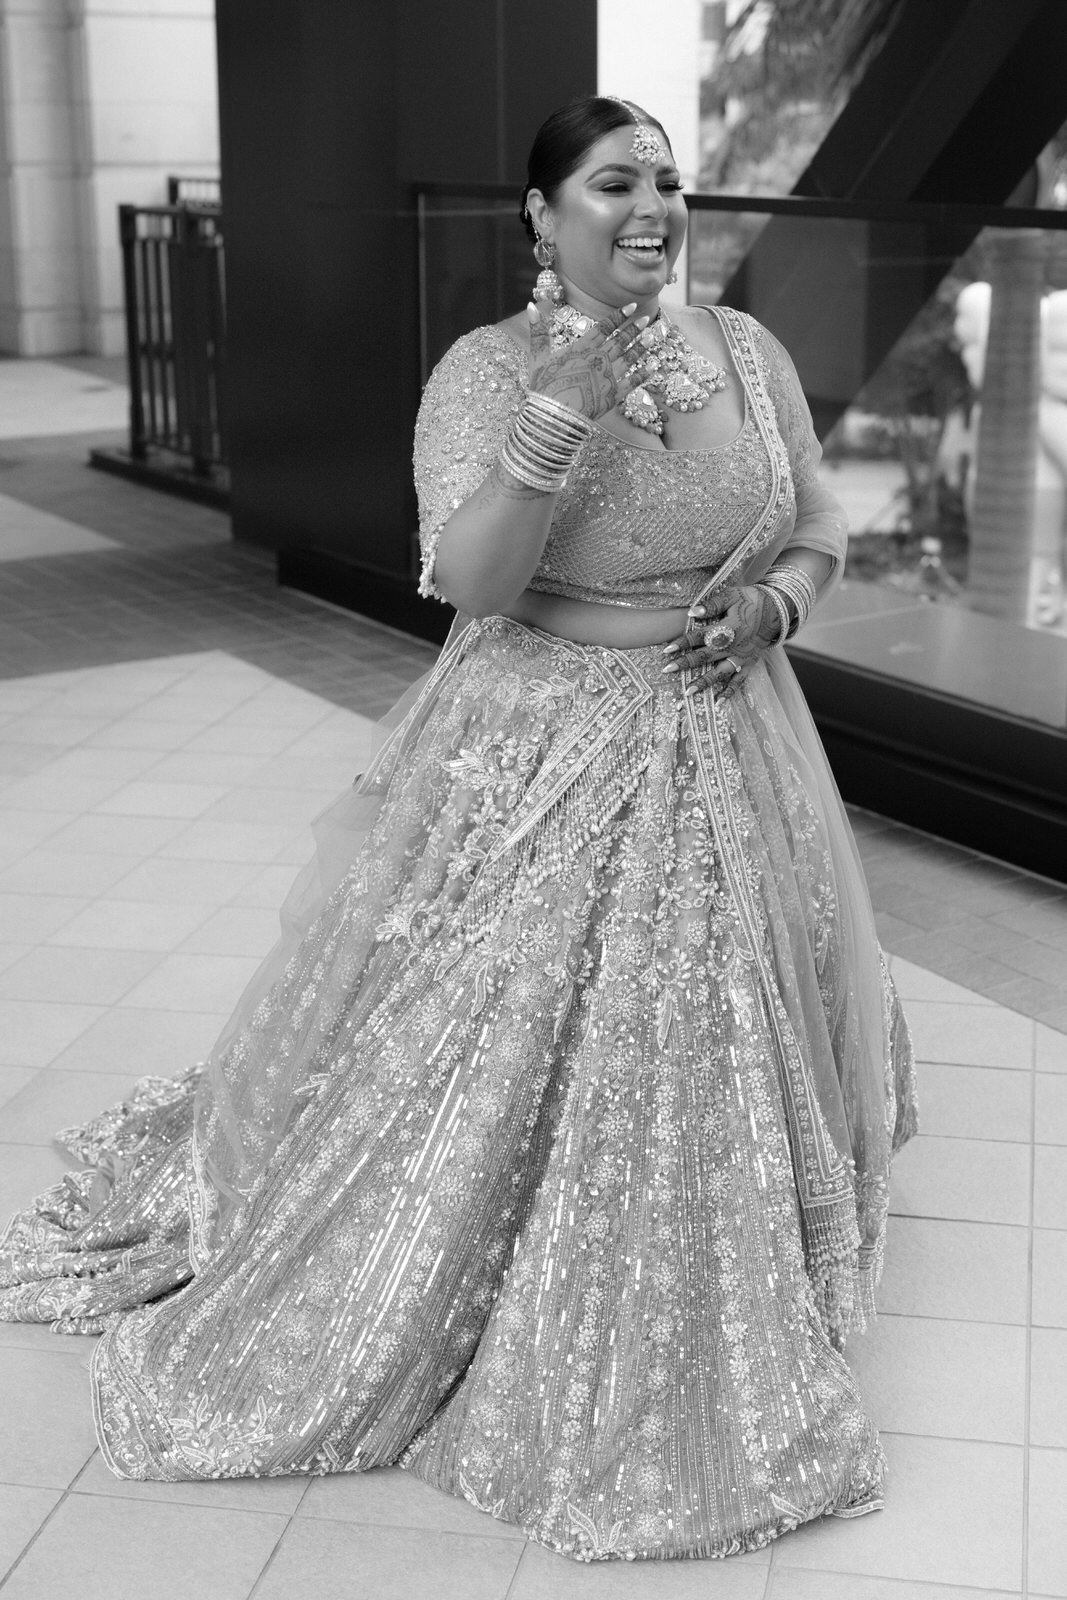 Luxury Indian Wedding in Miami Florida - Indian wedding photographer miami florida - michelle gonzalez photography - loews hotel in coral gables wedding-22.jpg